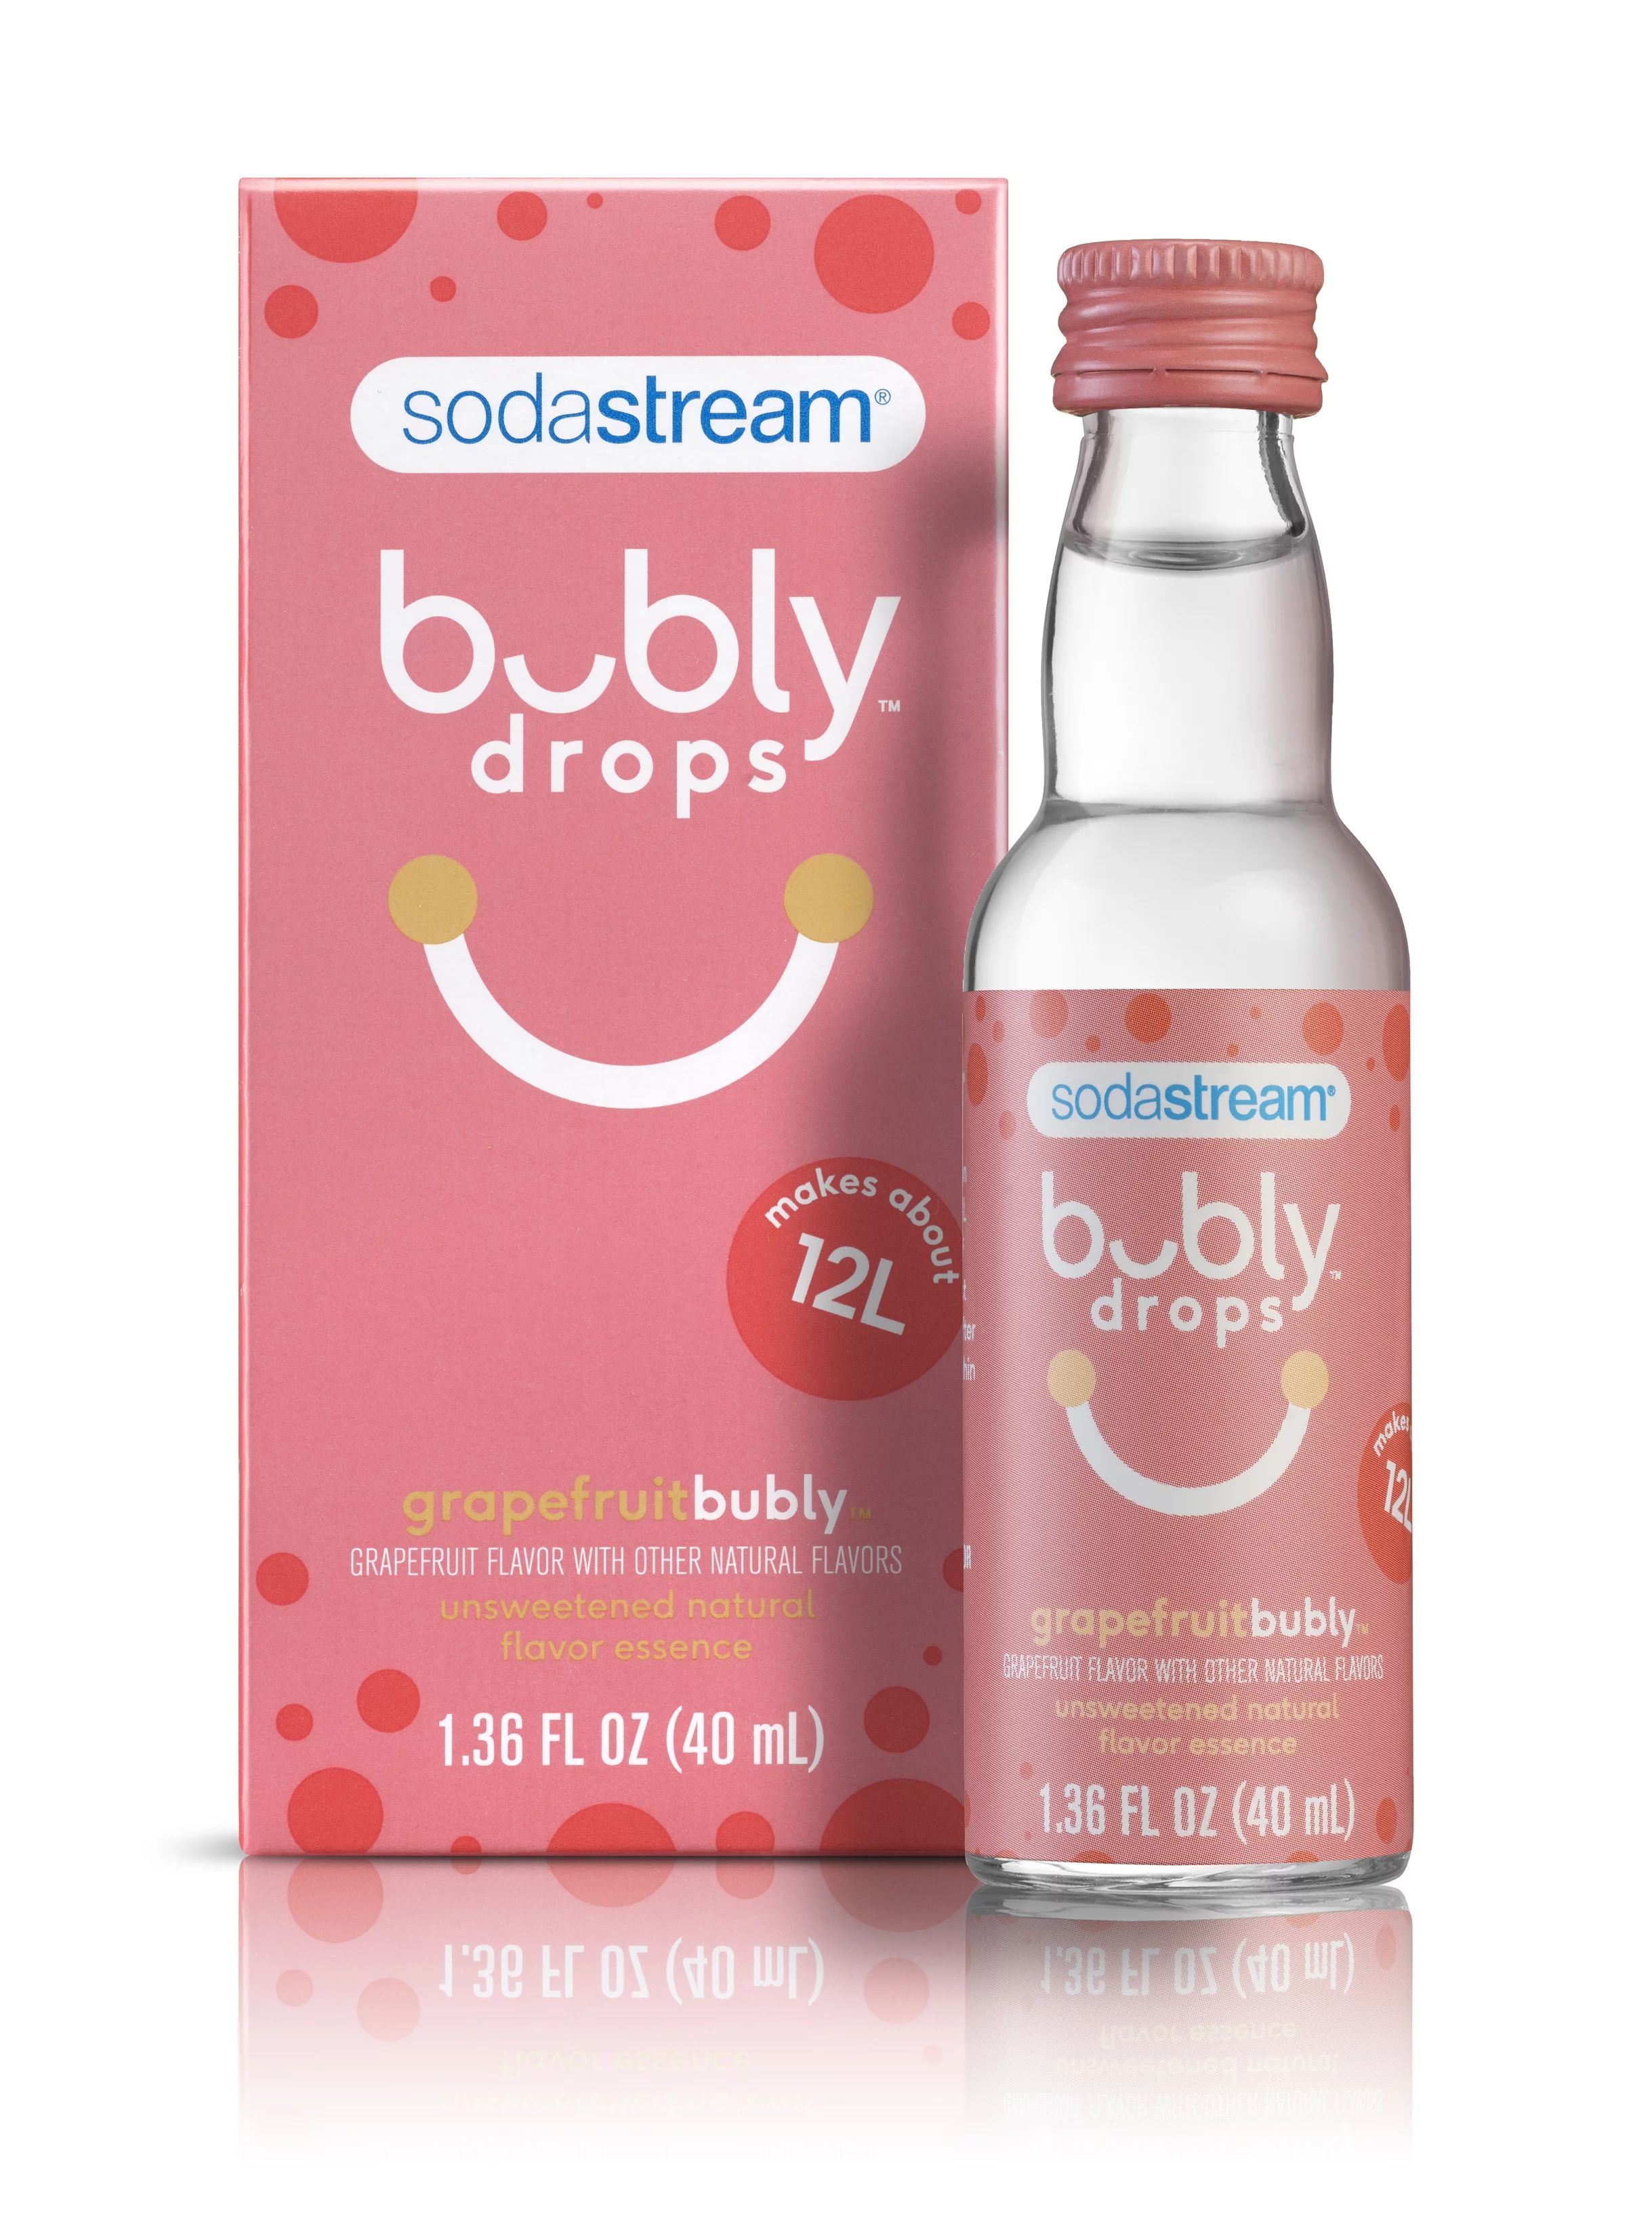 SodaStream bubly drops Unsweetened Natural Flavor Essence Grapefruit, 40 mL | Walmart (US)